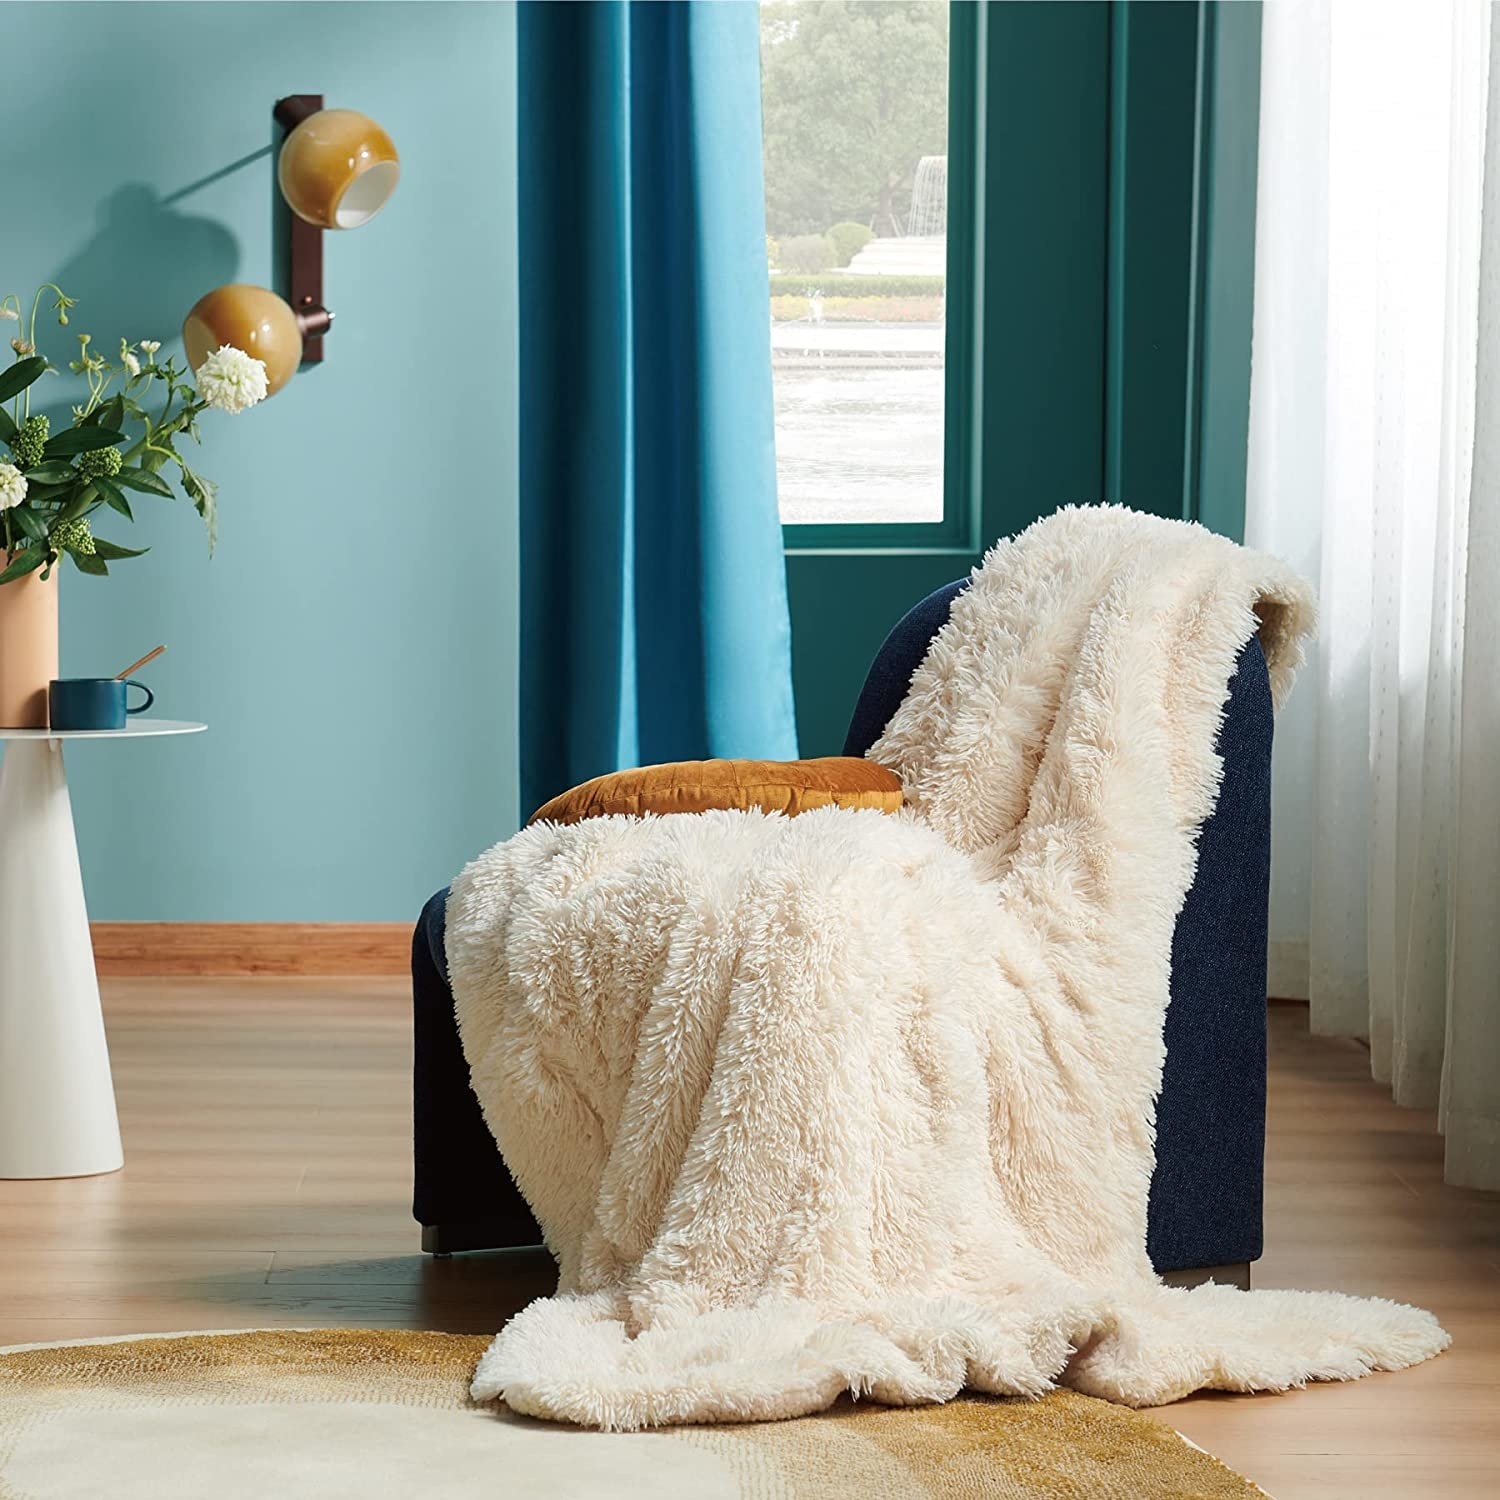 white faux fur blanket draped over a white accent chair